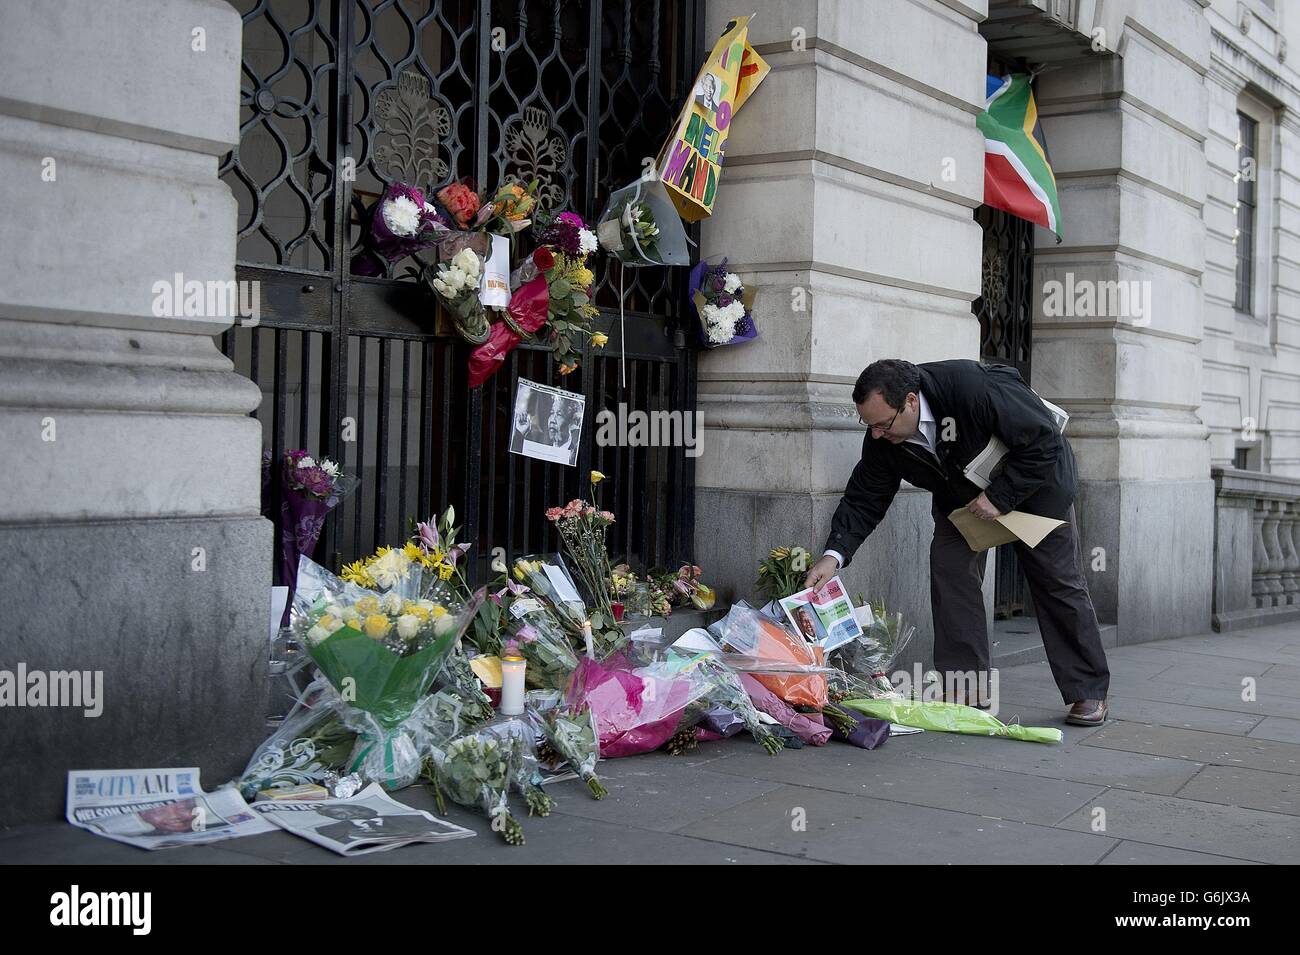 RETRANSMITTED CORRECTING CAPTION Floral tributes outside South Africa House, Trafalgar Square, central London following the announcement of the death of the former South African leader Nelson Mandela who has died at the age of 95. Stock Photo